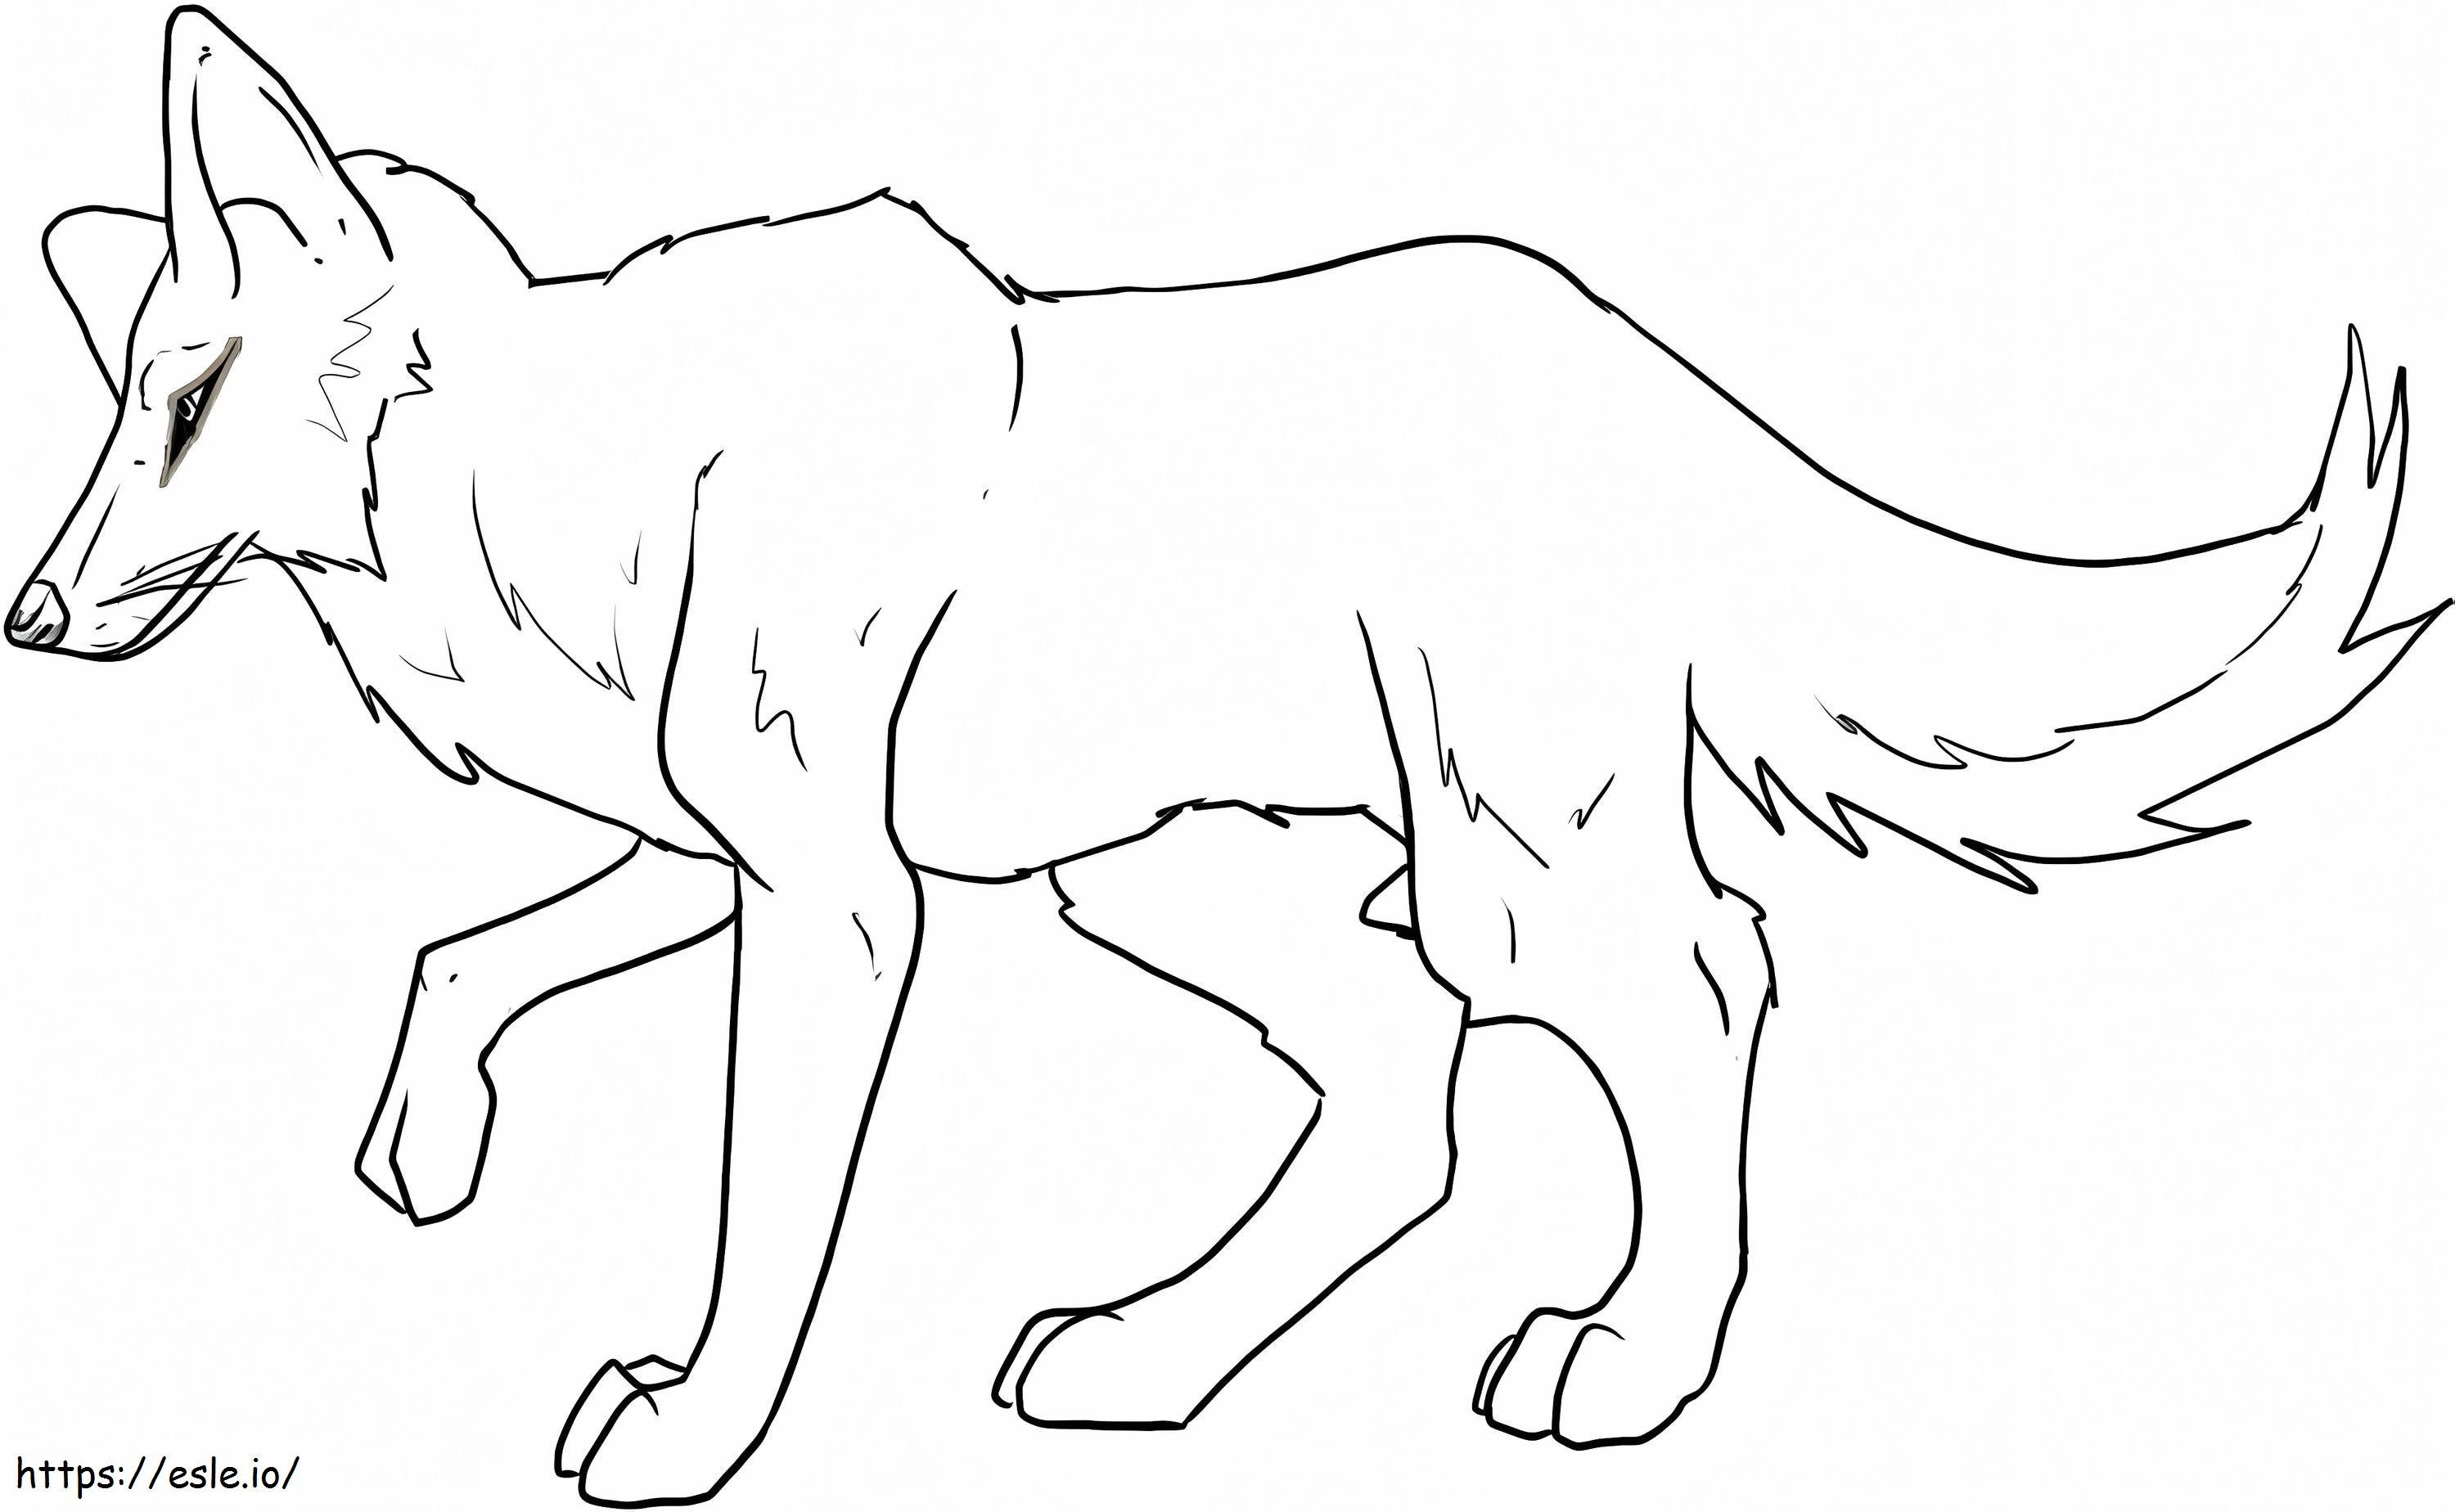 Clever Coyote coloring page